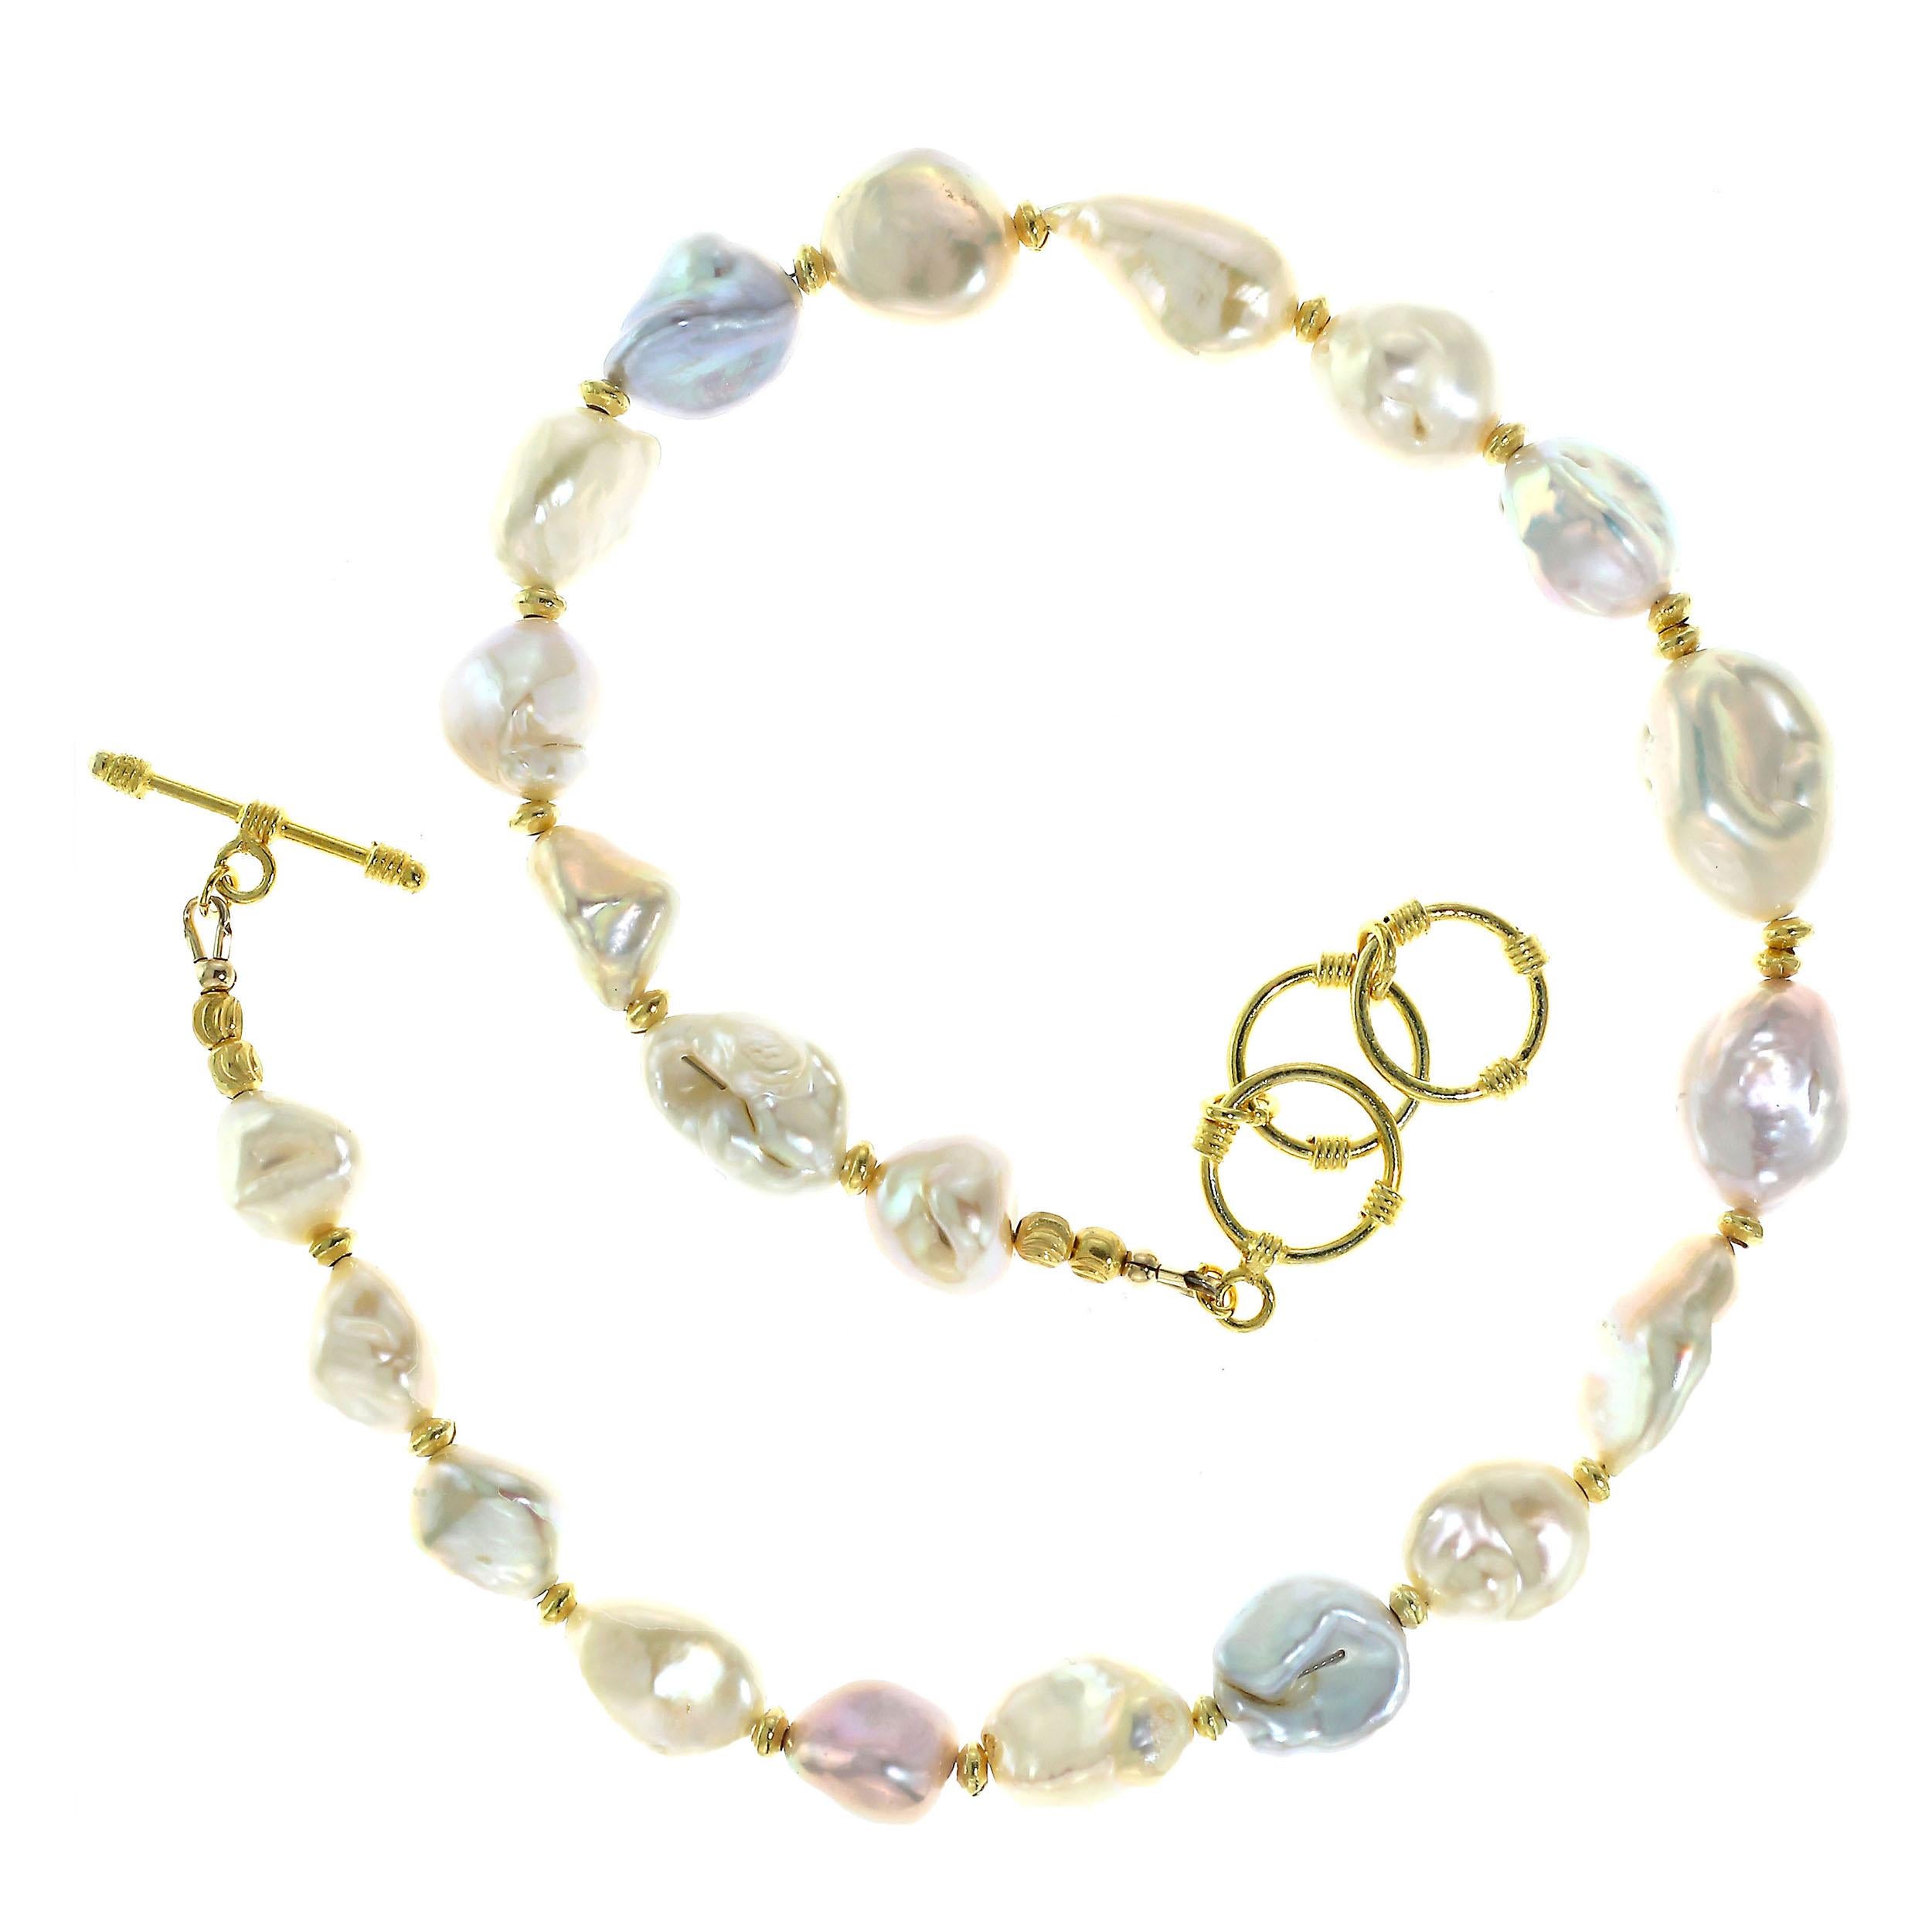 Women's or Men's Gorgeous, Glowing, Iridescent Freshwater Pearl Choker Necklace June Birthstone